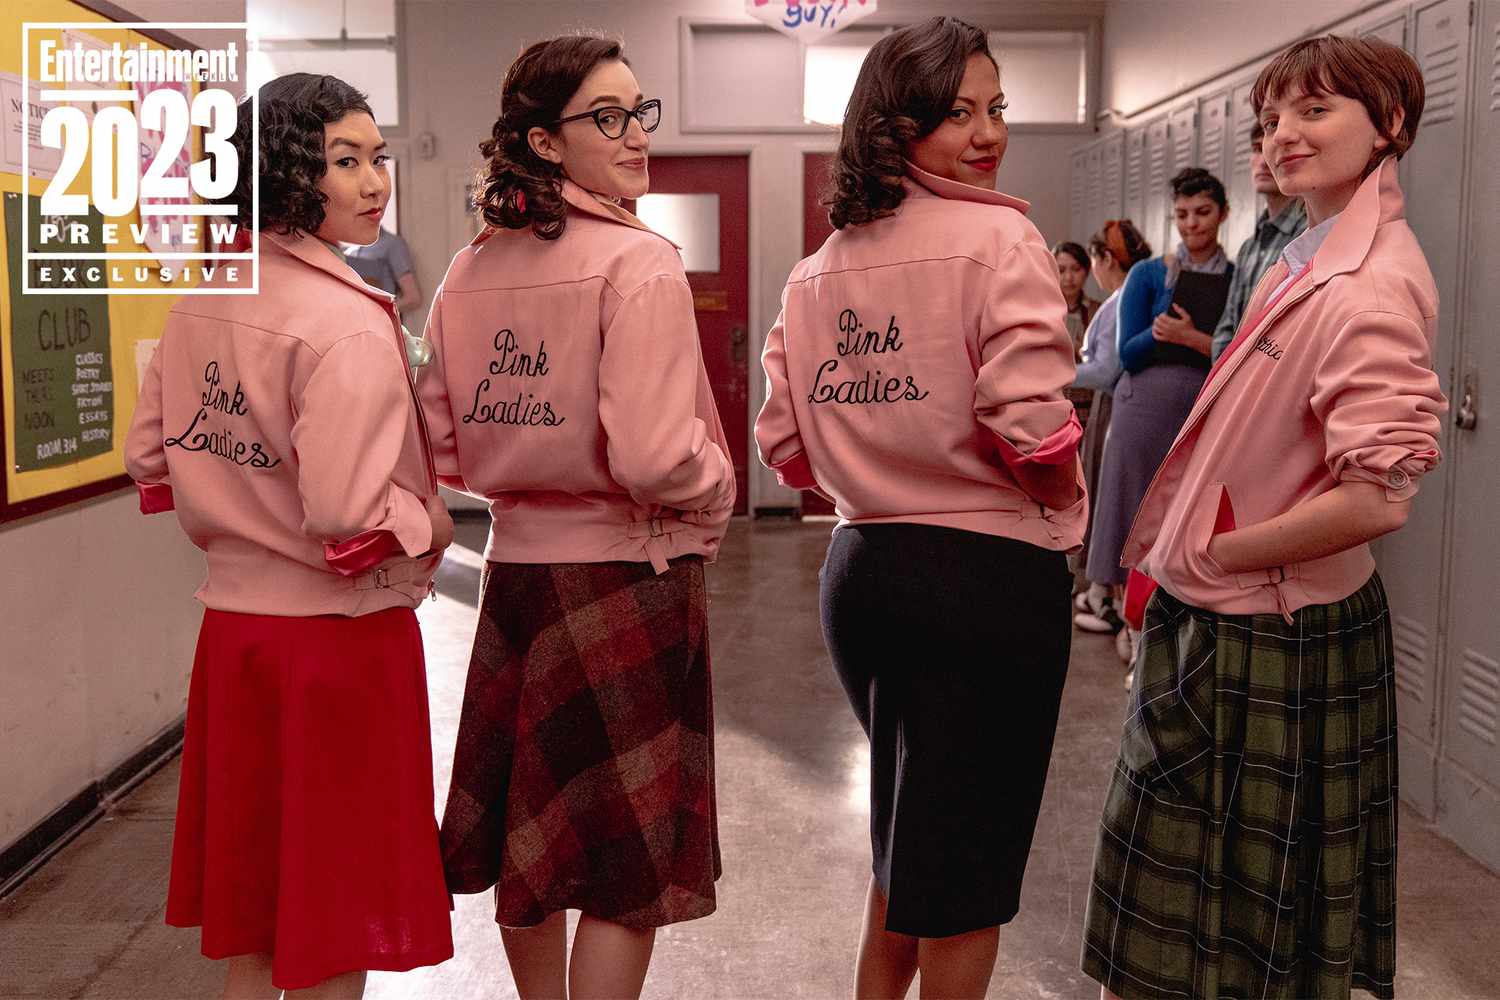 GREASE: RISE OF THE PINK LADIES musical prequel series on Paramount+